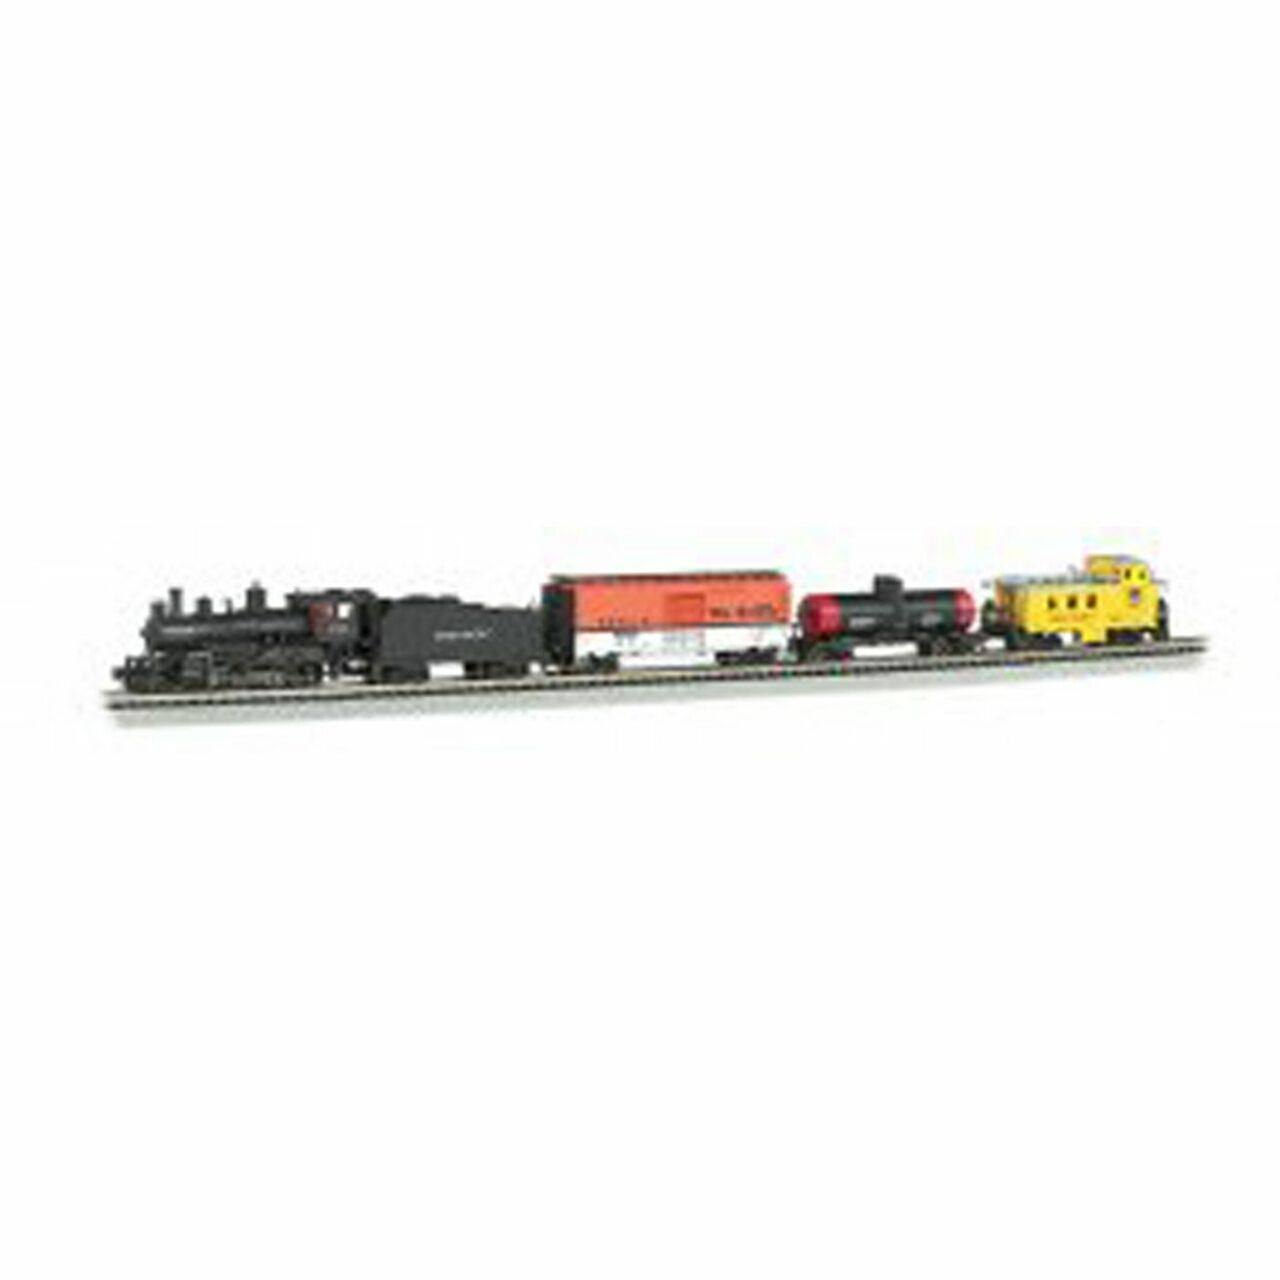 Bachmann Trains - Whistle-Stop Special DCC Sound Value Ready to Run Electric Train Set - N Scale